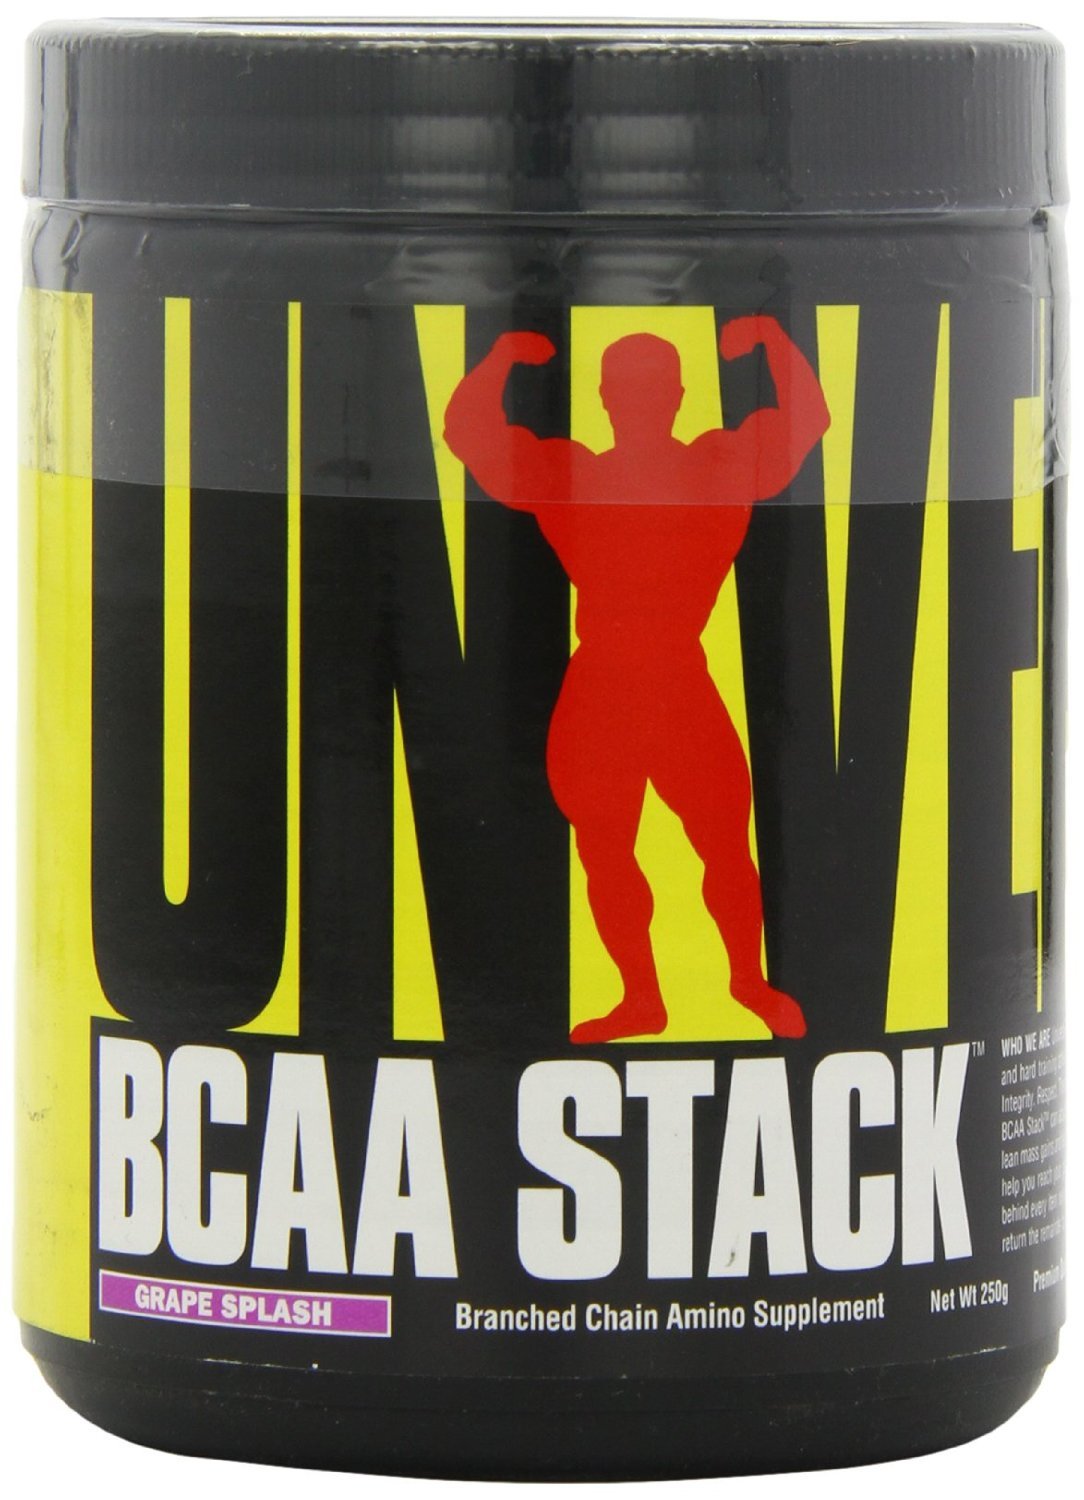 BCAA Stack, 250 g, Universal Nutrition. BCAA. Weight Loss recovery Anti-catabolic properties Lean muscle mass 